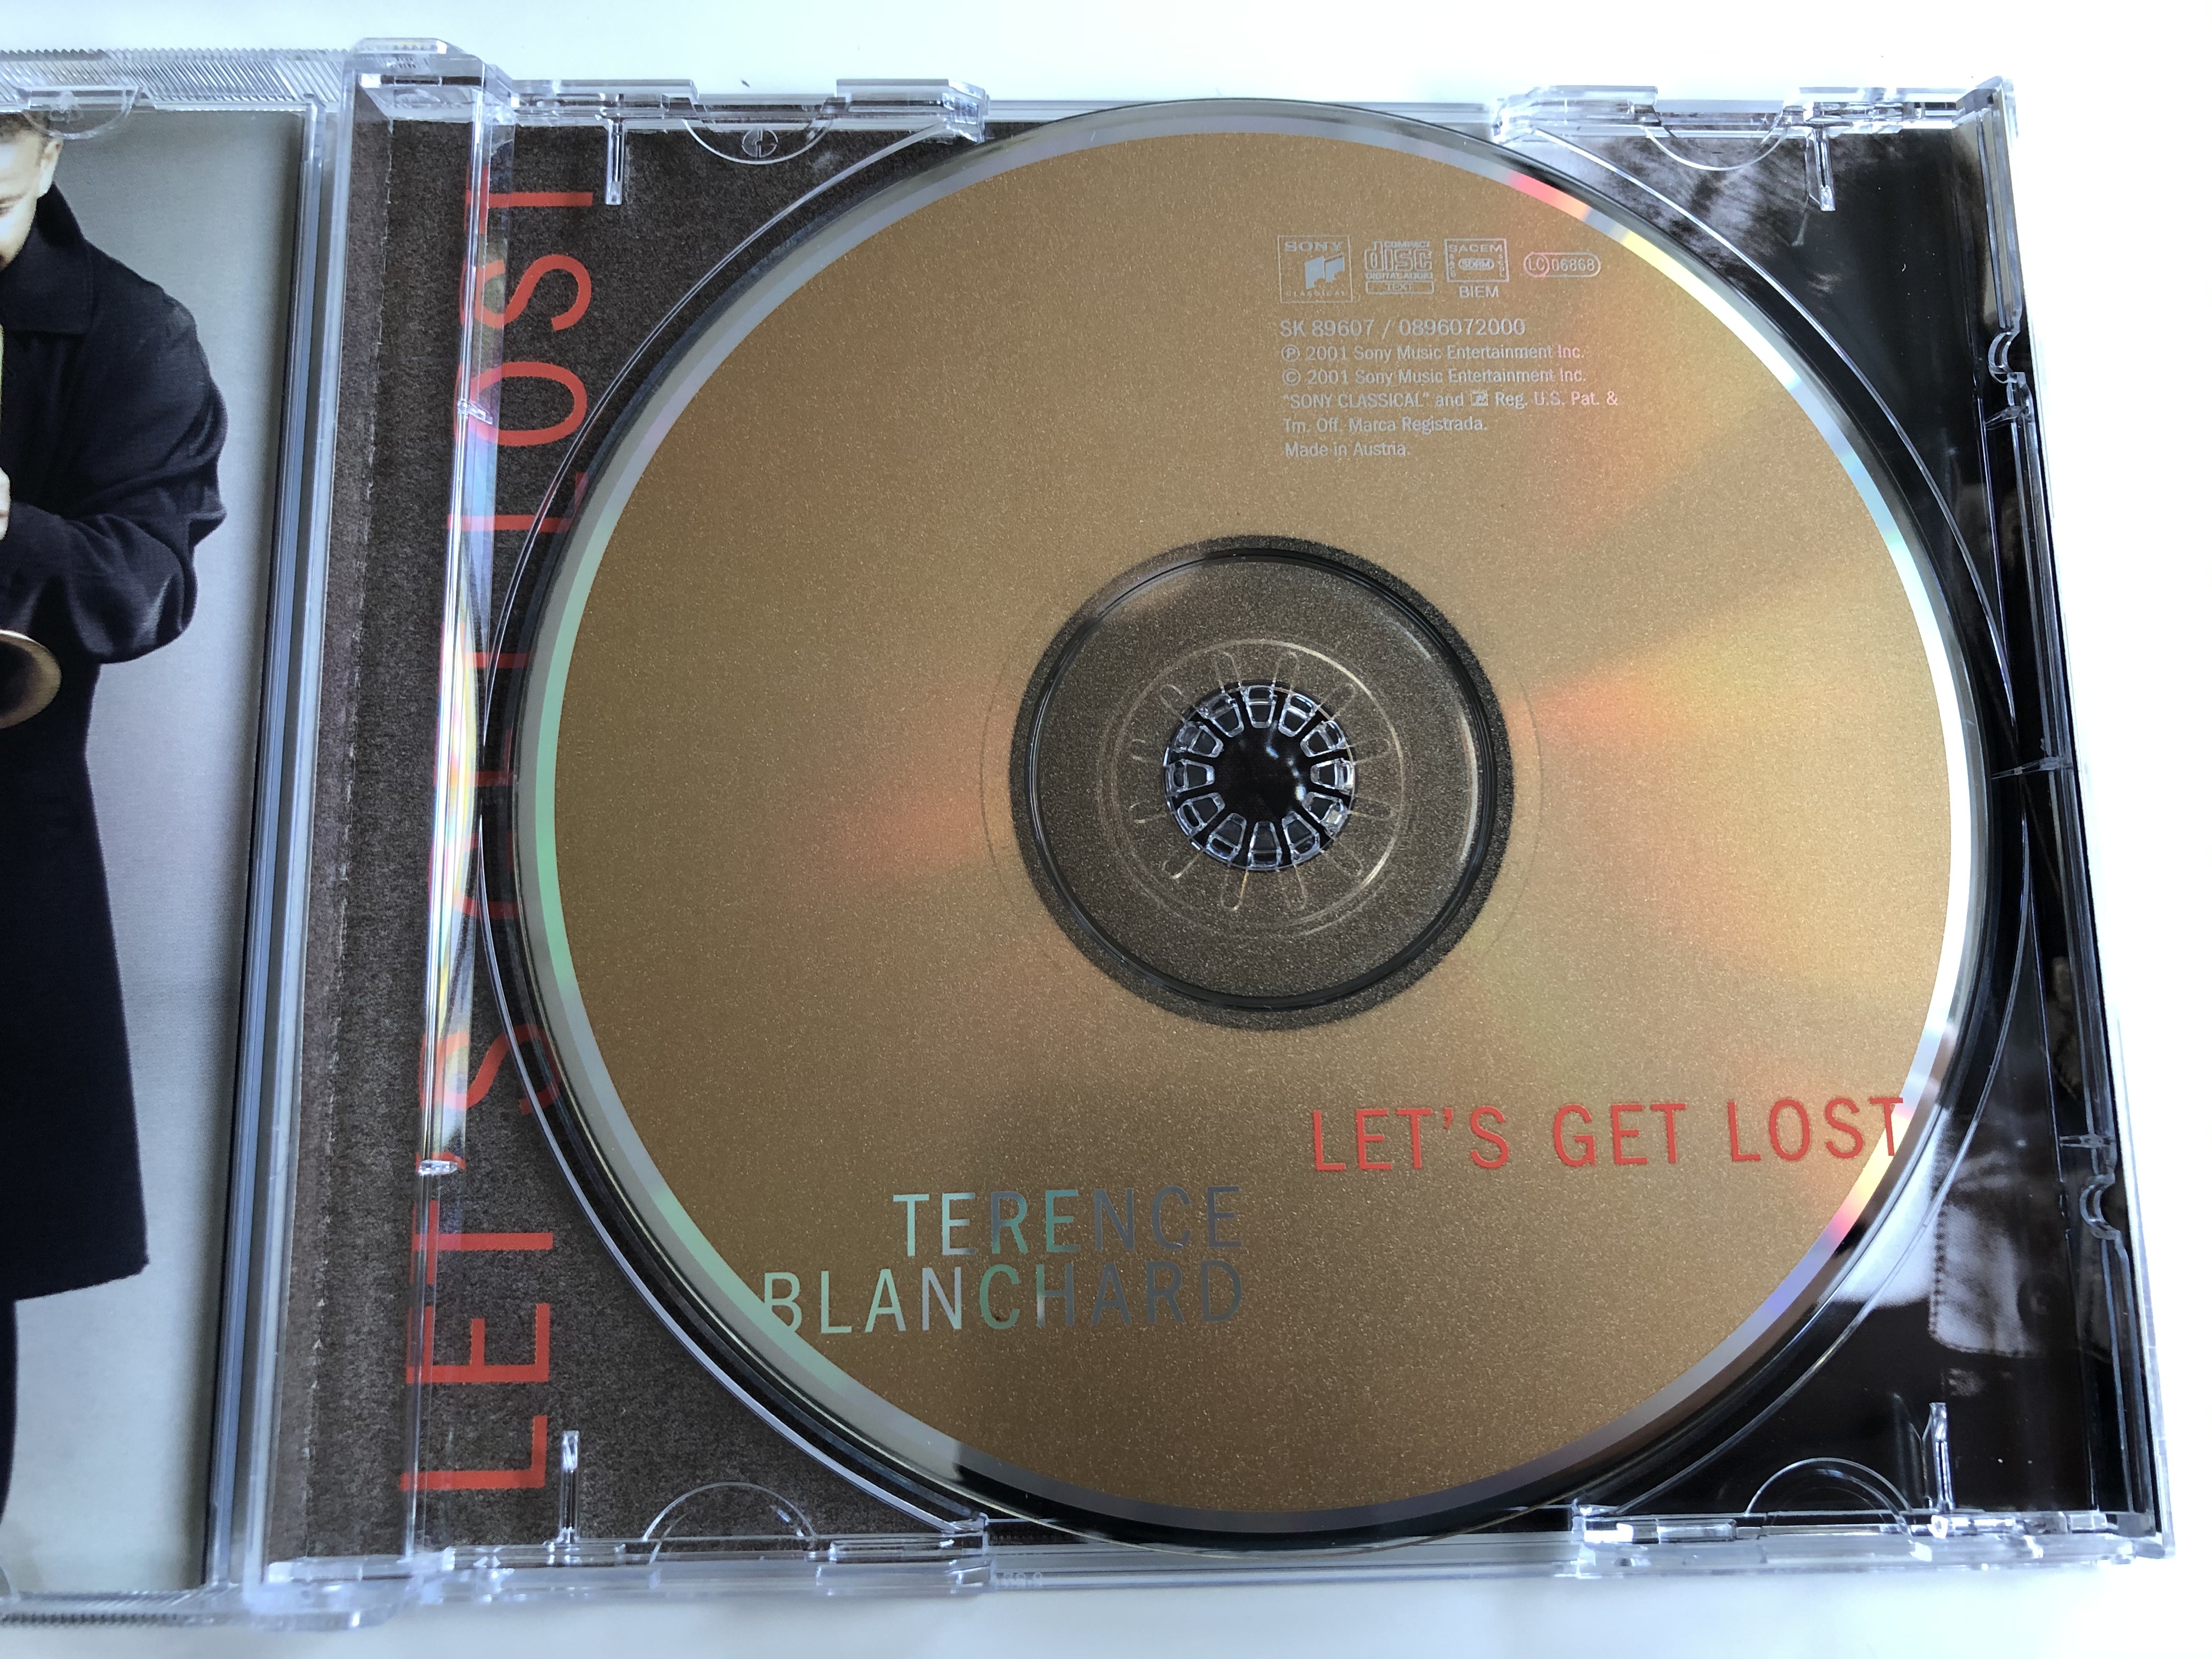 terence-blanchard-let-s-get-lost-sony-classical-audio-cd-2001-sk-89607-5-.jpg